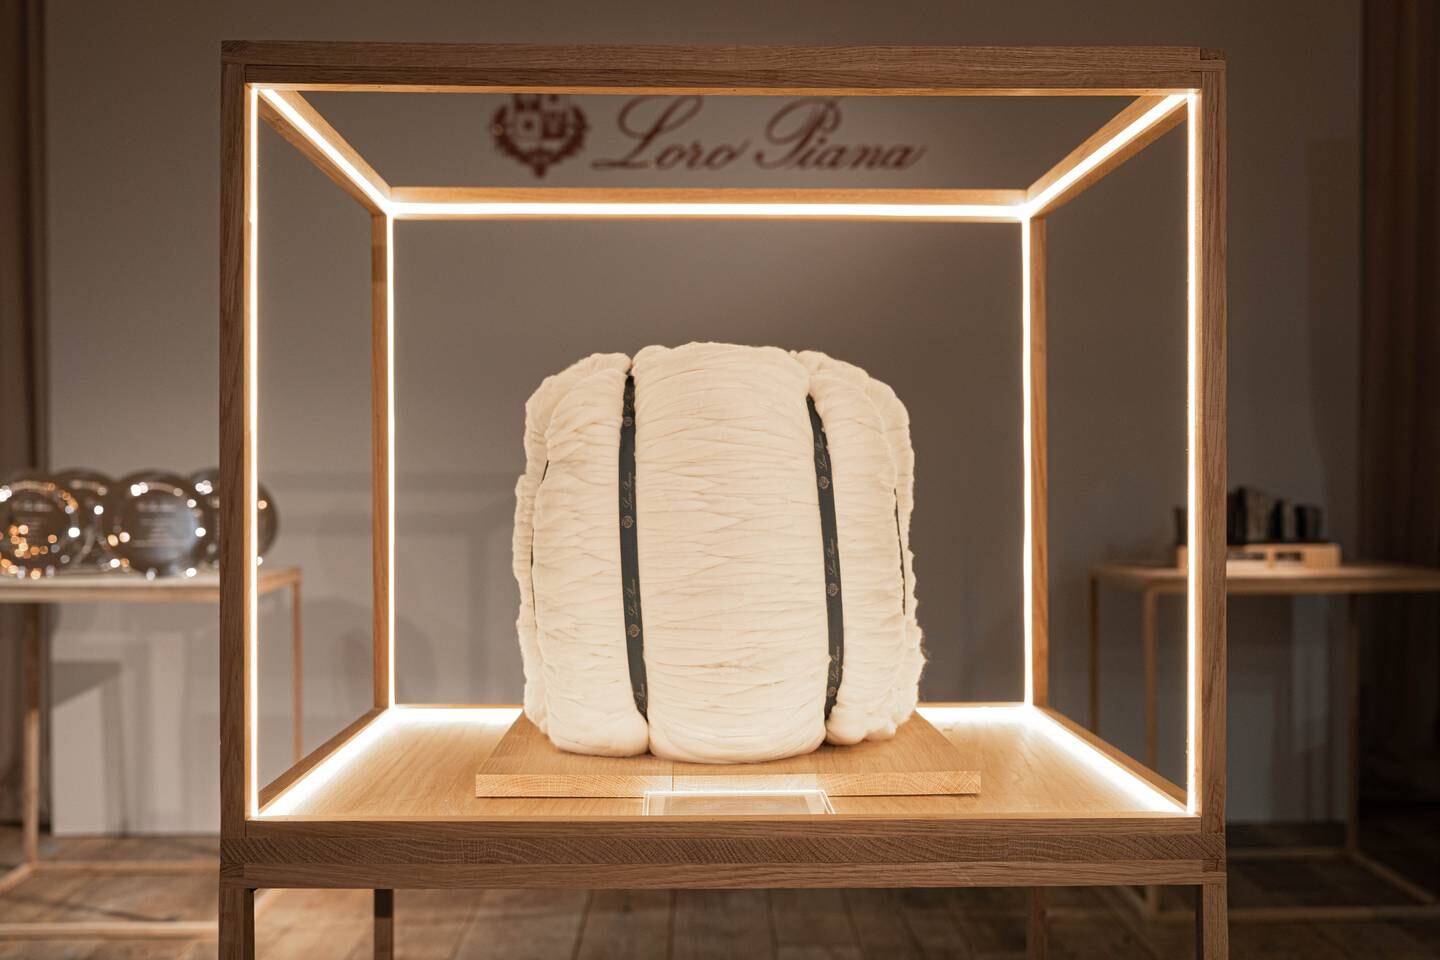 Loro Piana’s Extraordinary Bale competition is designed to spur merino farmers in Australia and New Zealand to produce ever finer and higher quality wool.